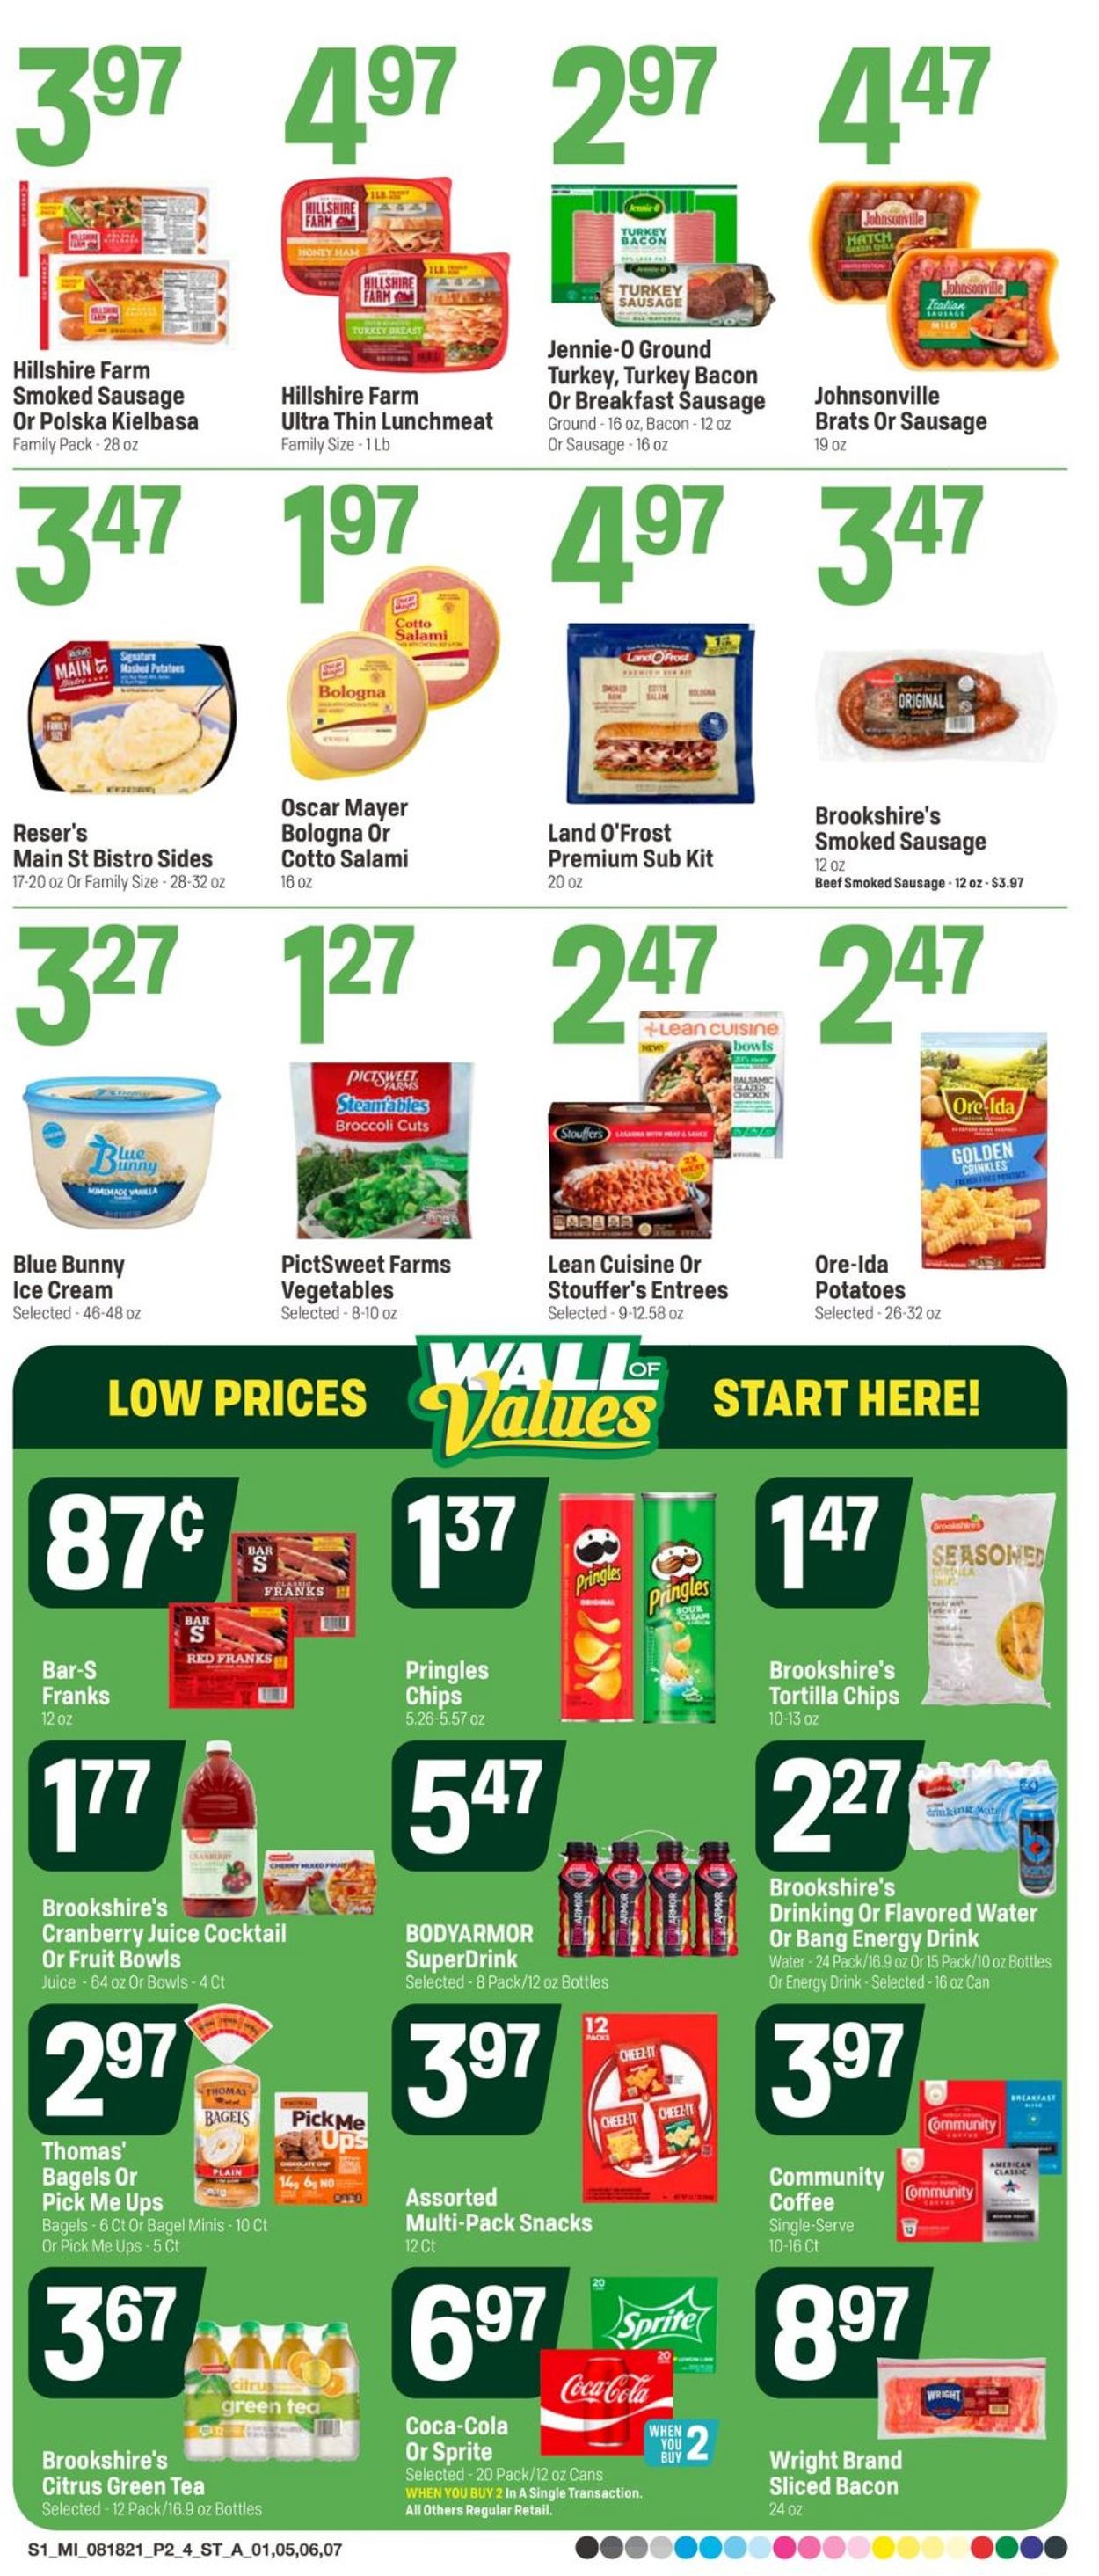 Catalogue Super 1 Foods from 08/18/2021